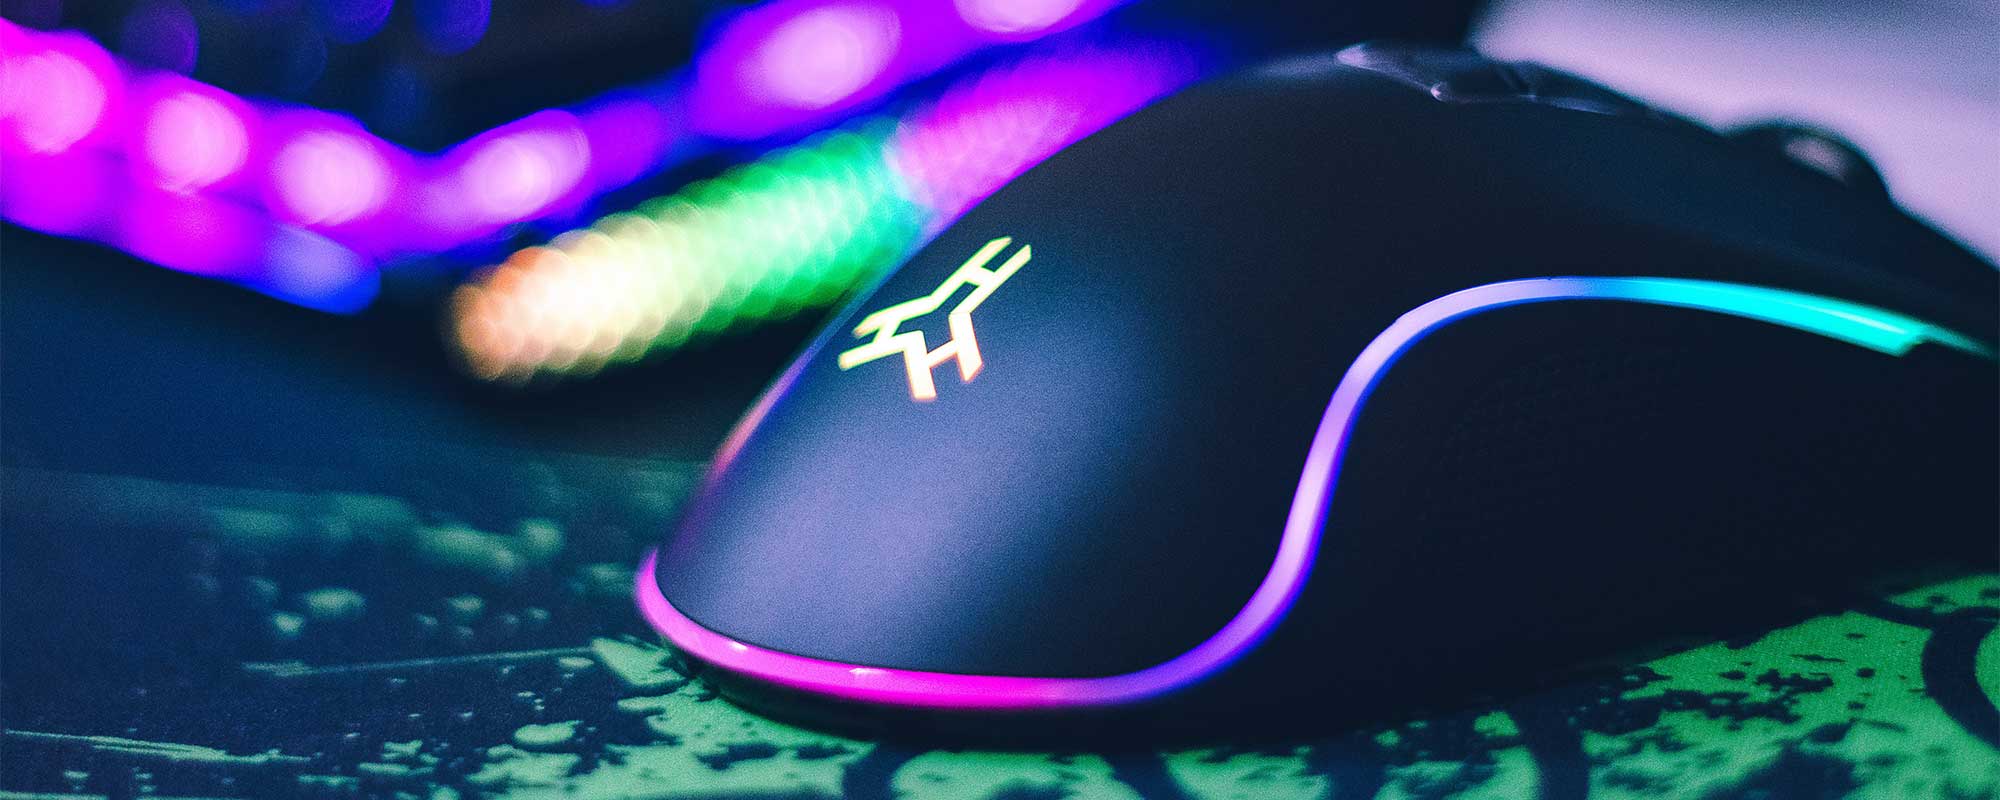 Gaming mouse header